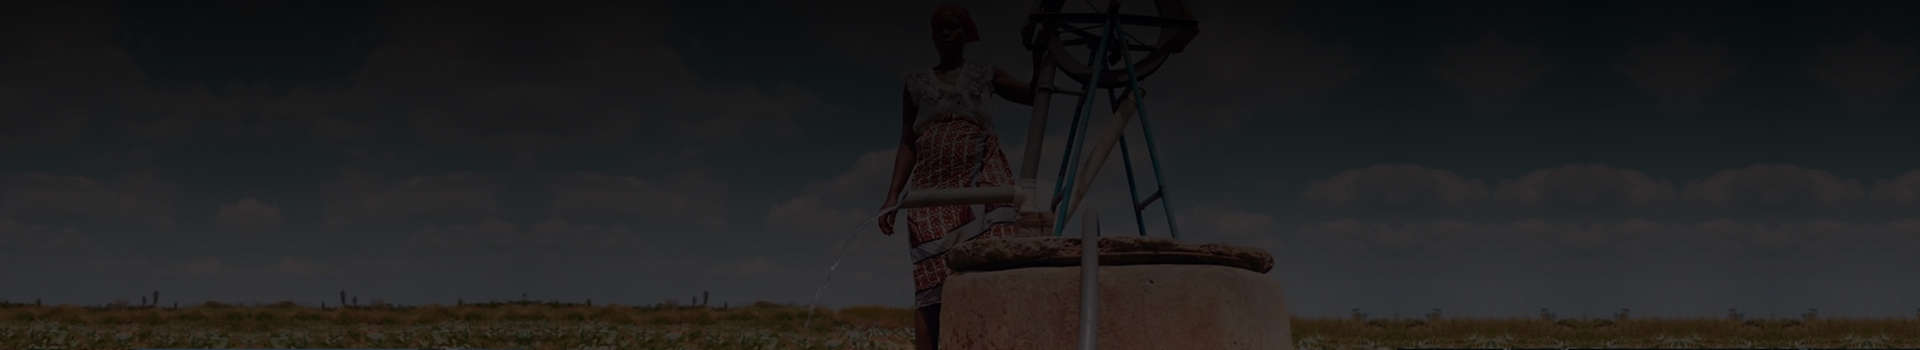 woman in the field with waterpump - 2